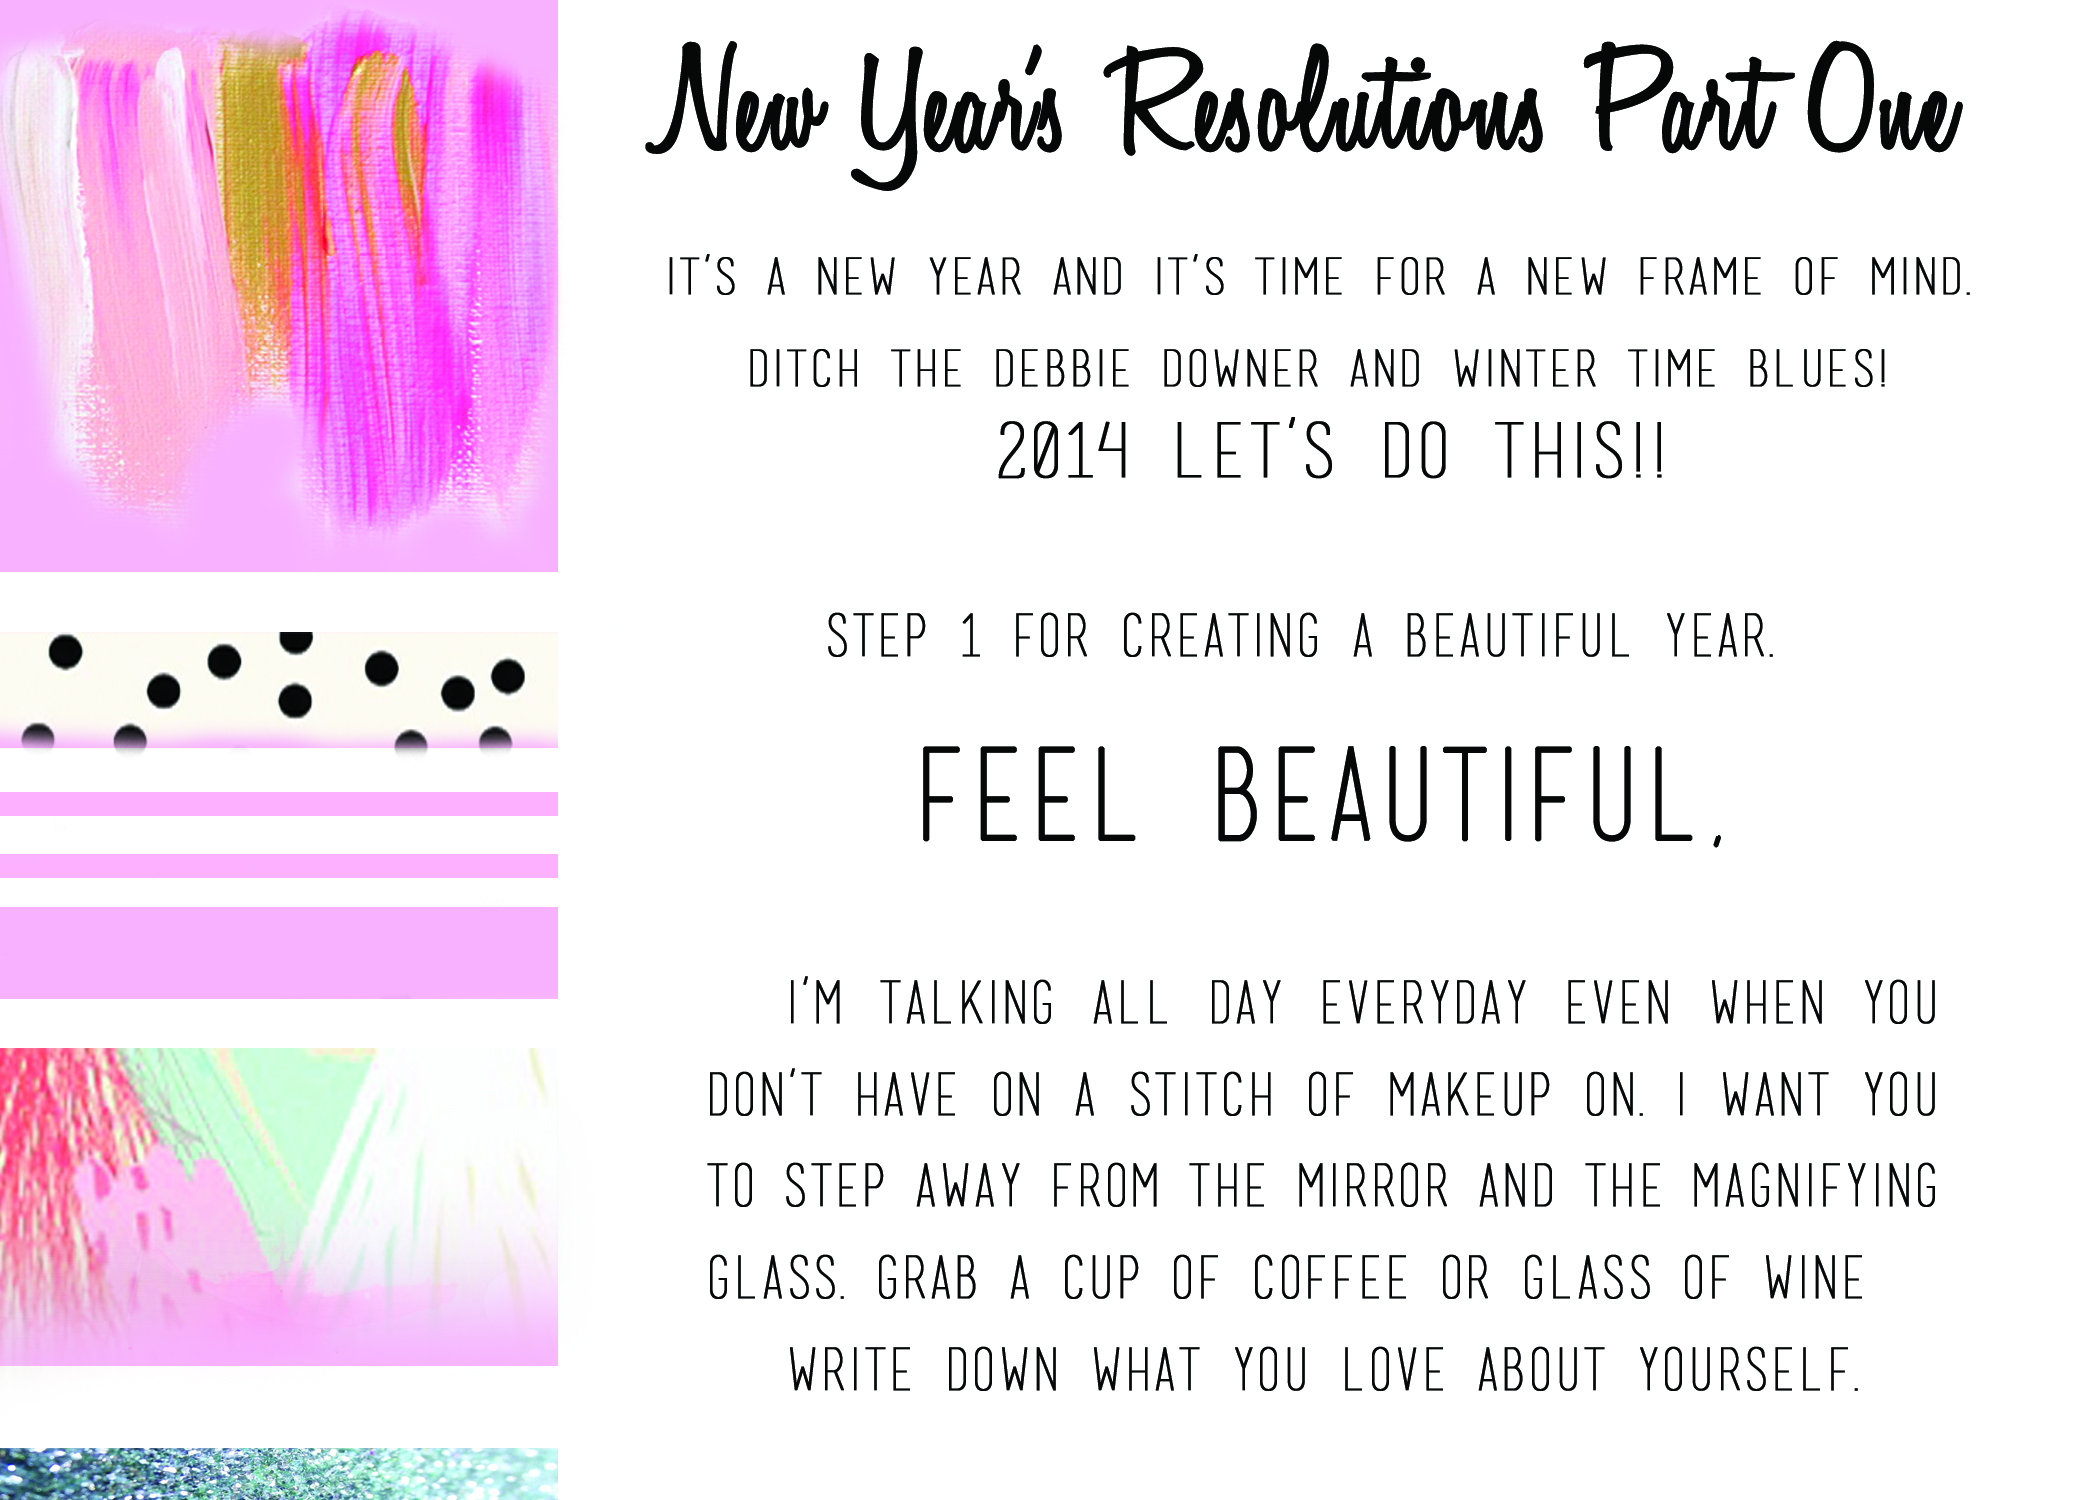 New Year Resolutions Part One